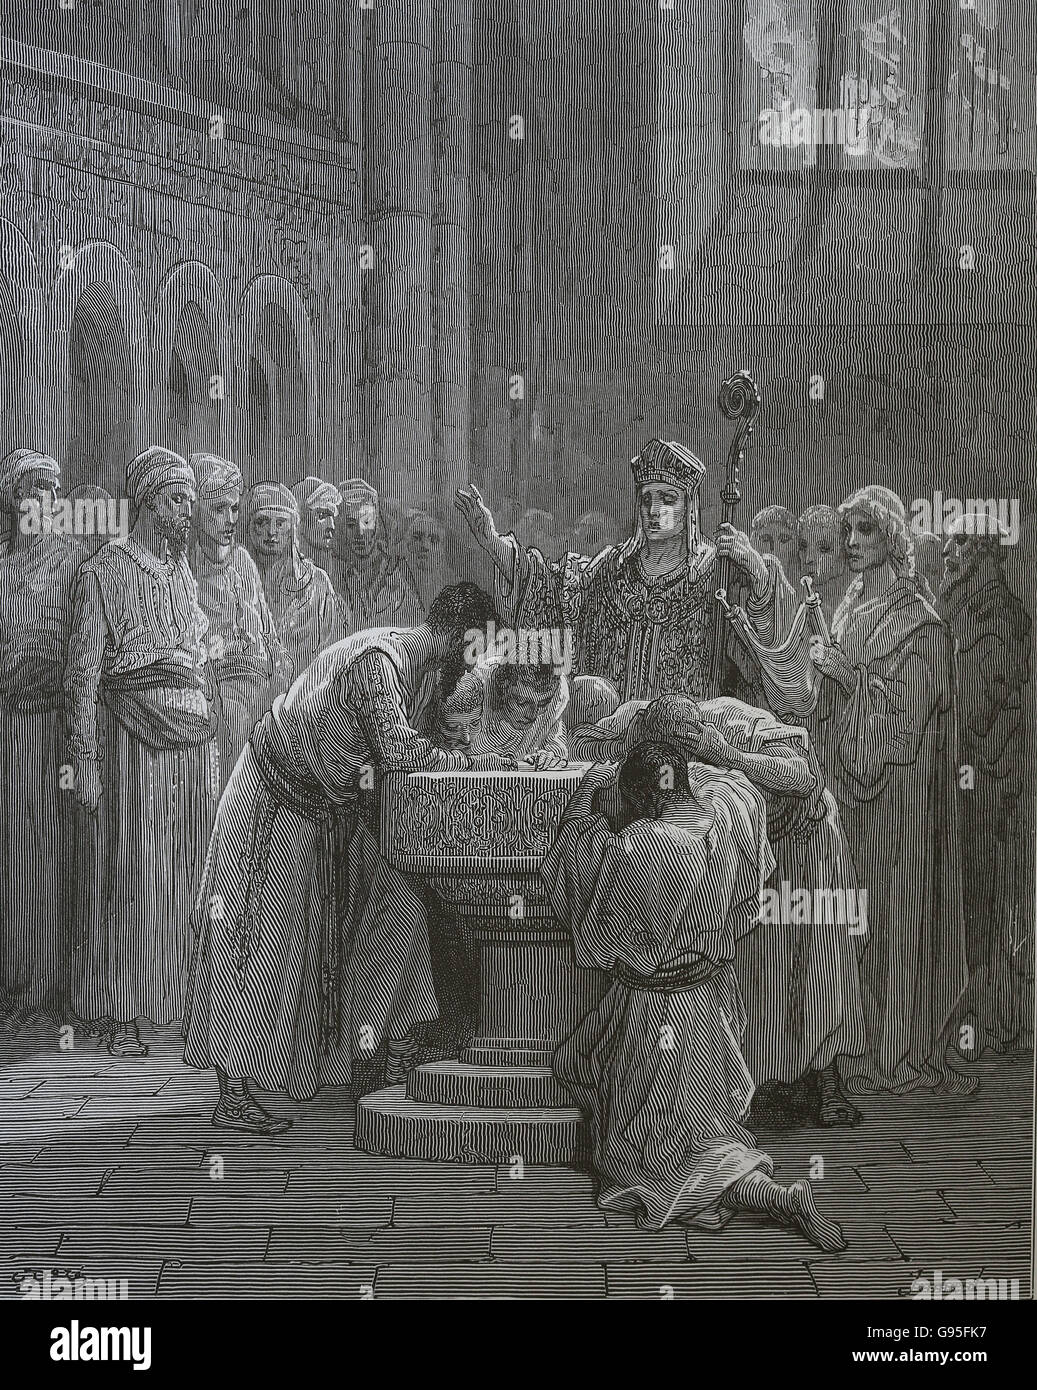 The Crusades of Gustave Dore.  The baptism of infidels. Ceremony. Engraving, 19th c. Stock Photo